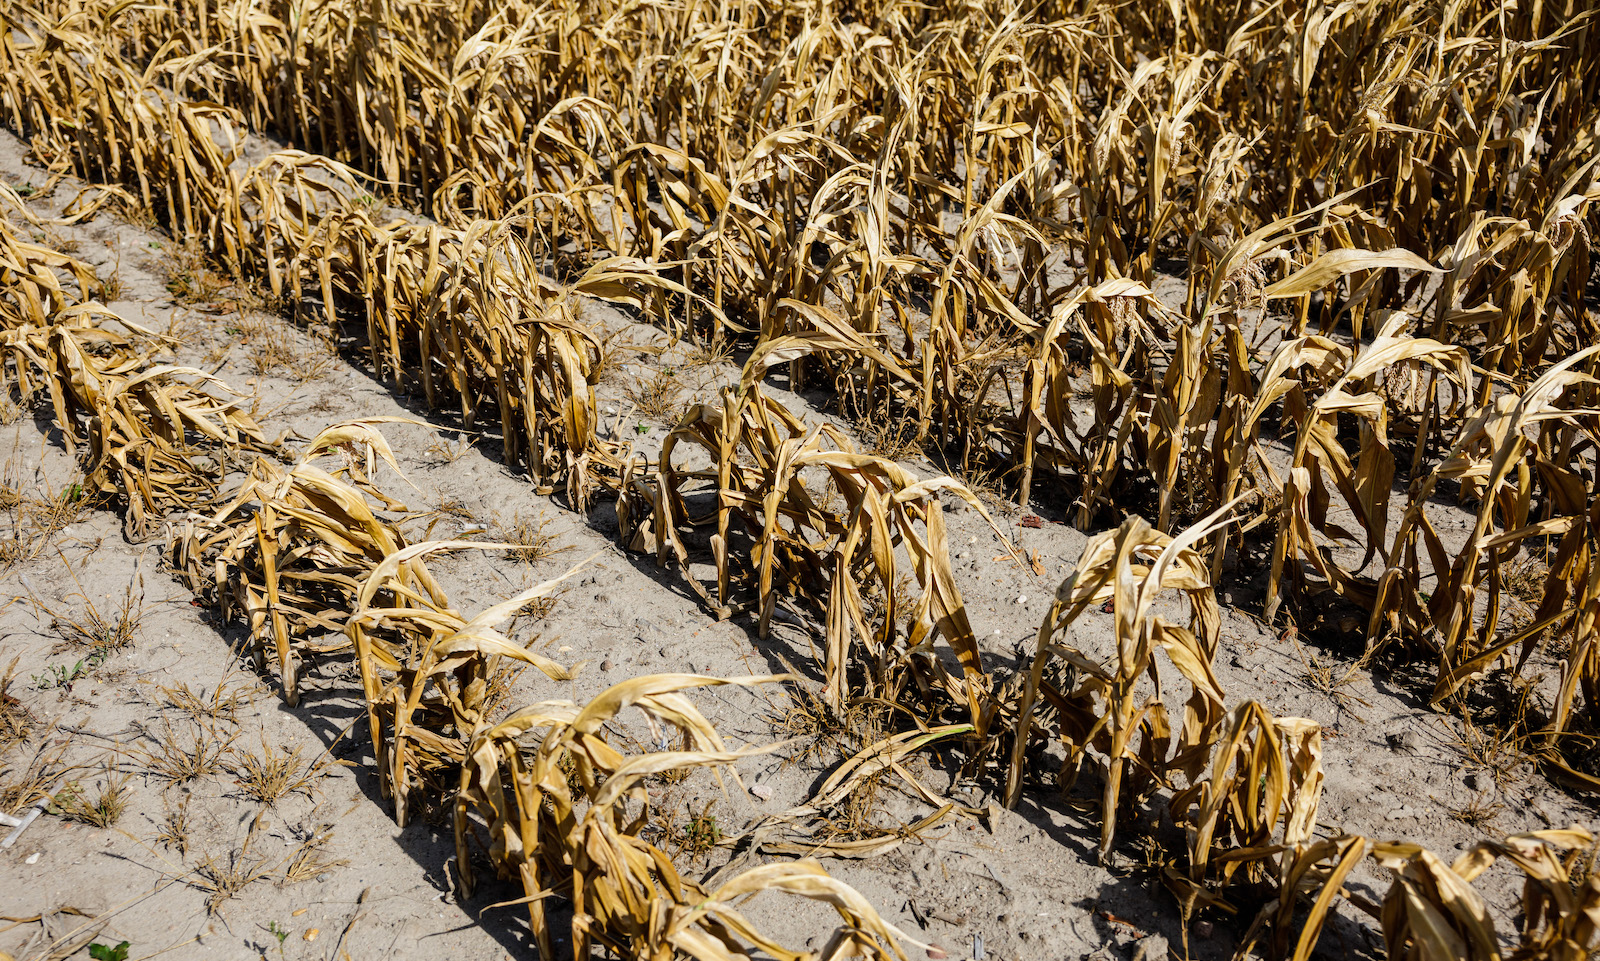 A withered and dried up field of maize plants under drought